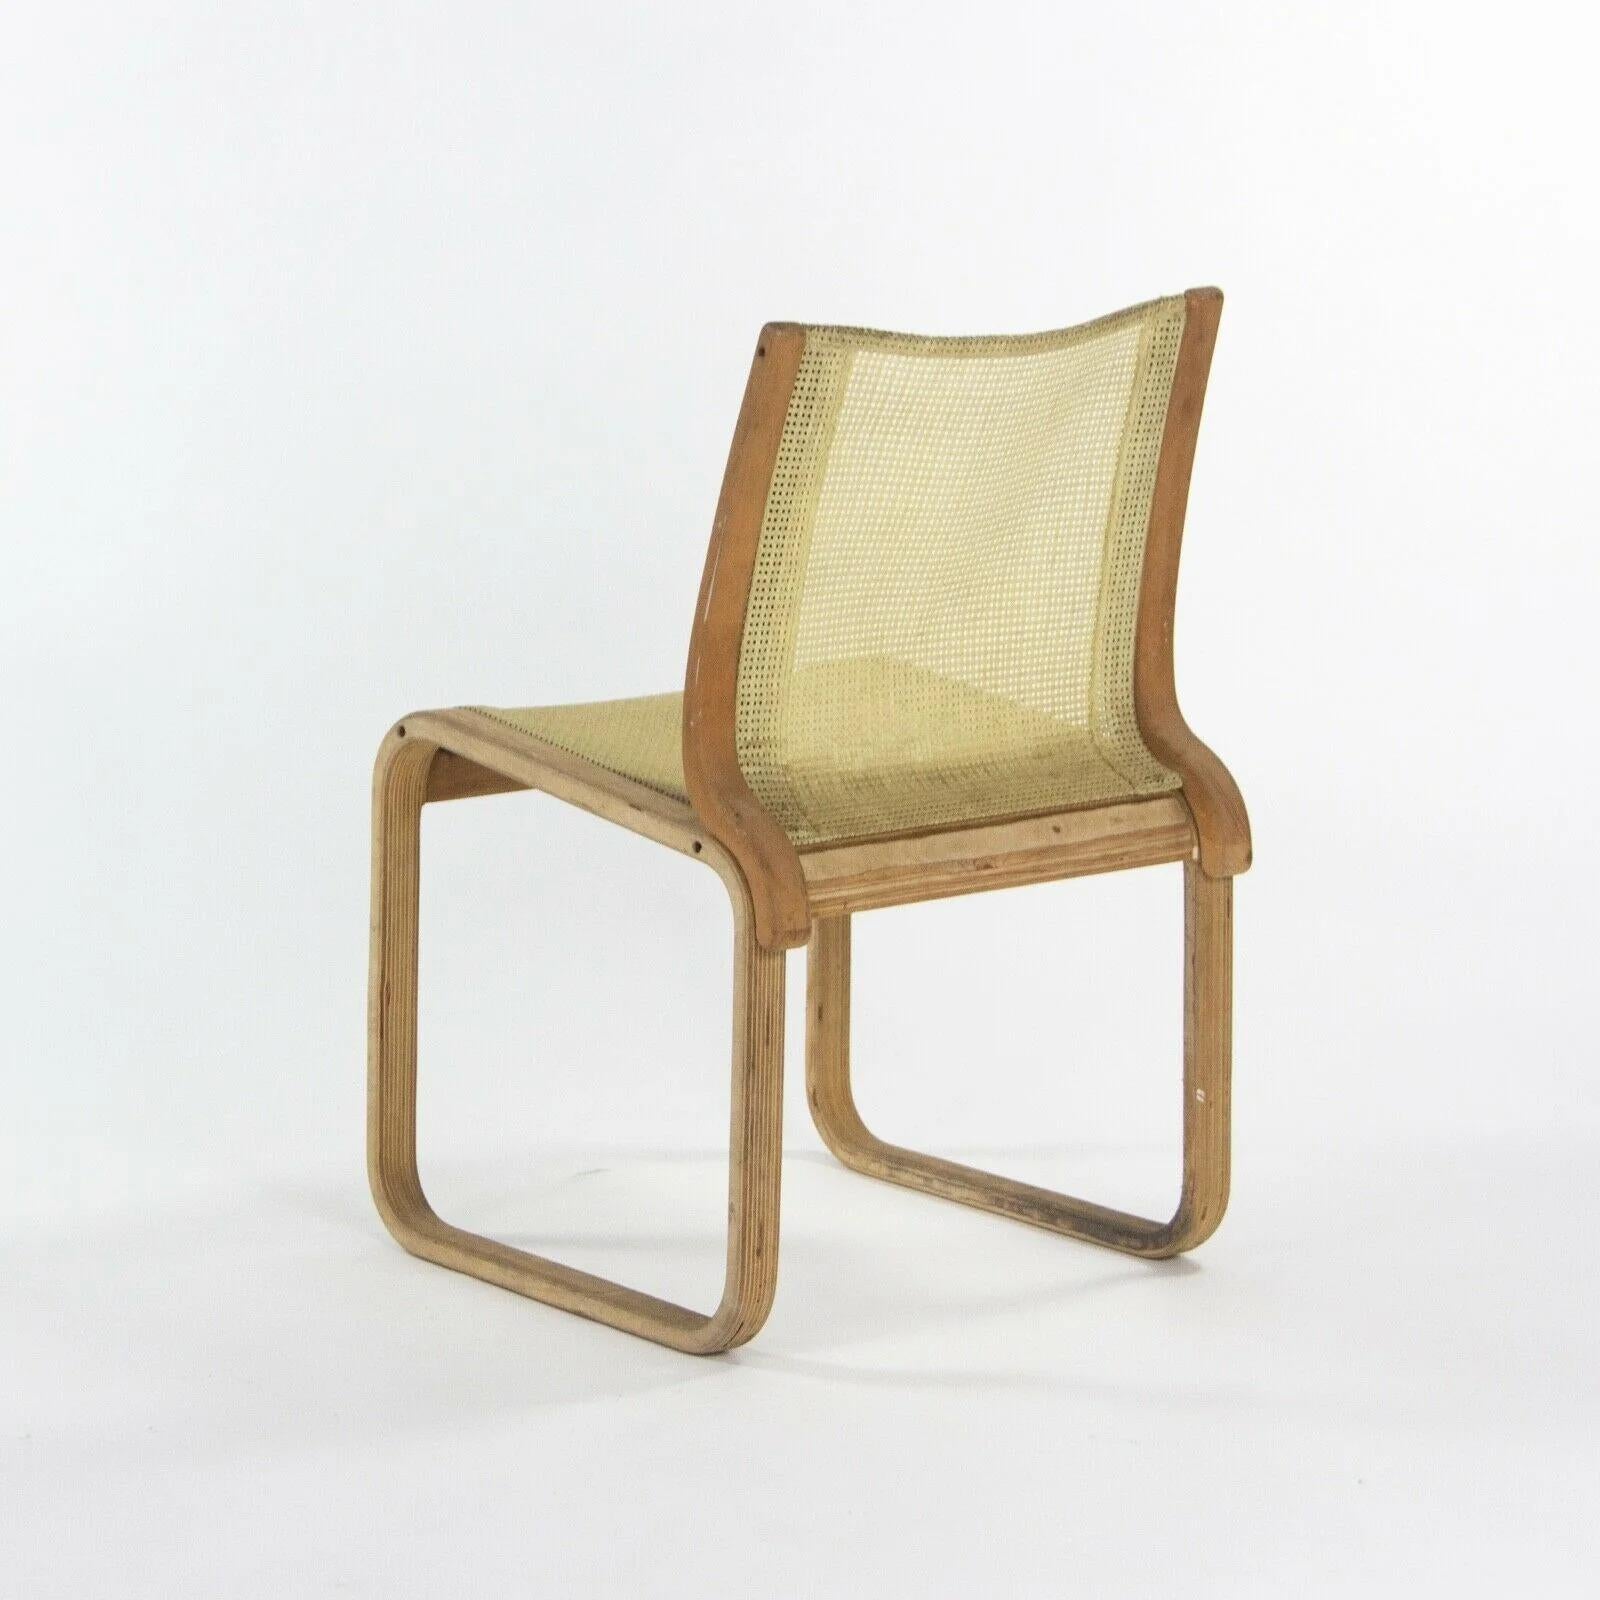 Bentwood 1985 Prototype Richard Schultz Wooden Outdoor Collection Dining Chair For Sale